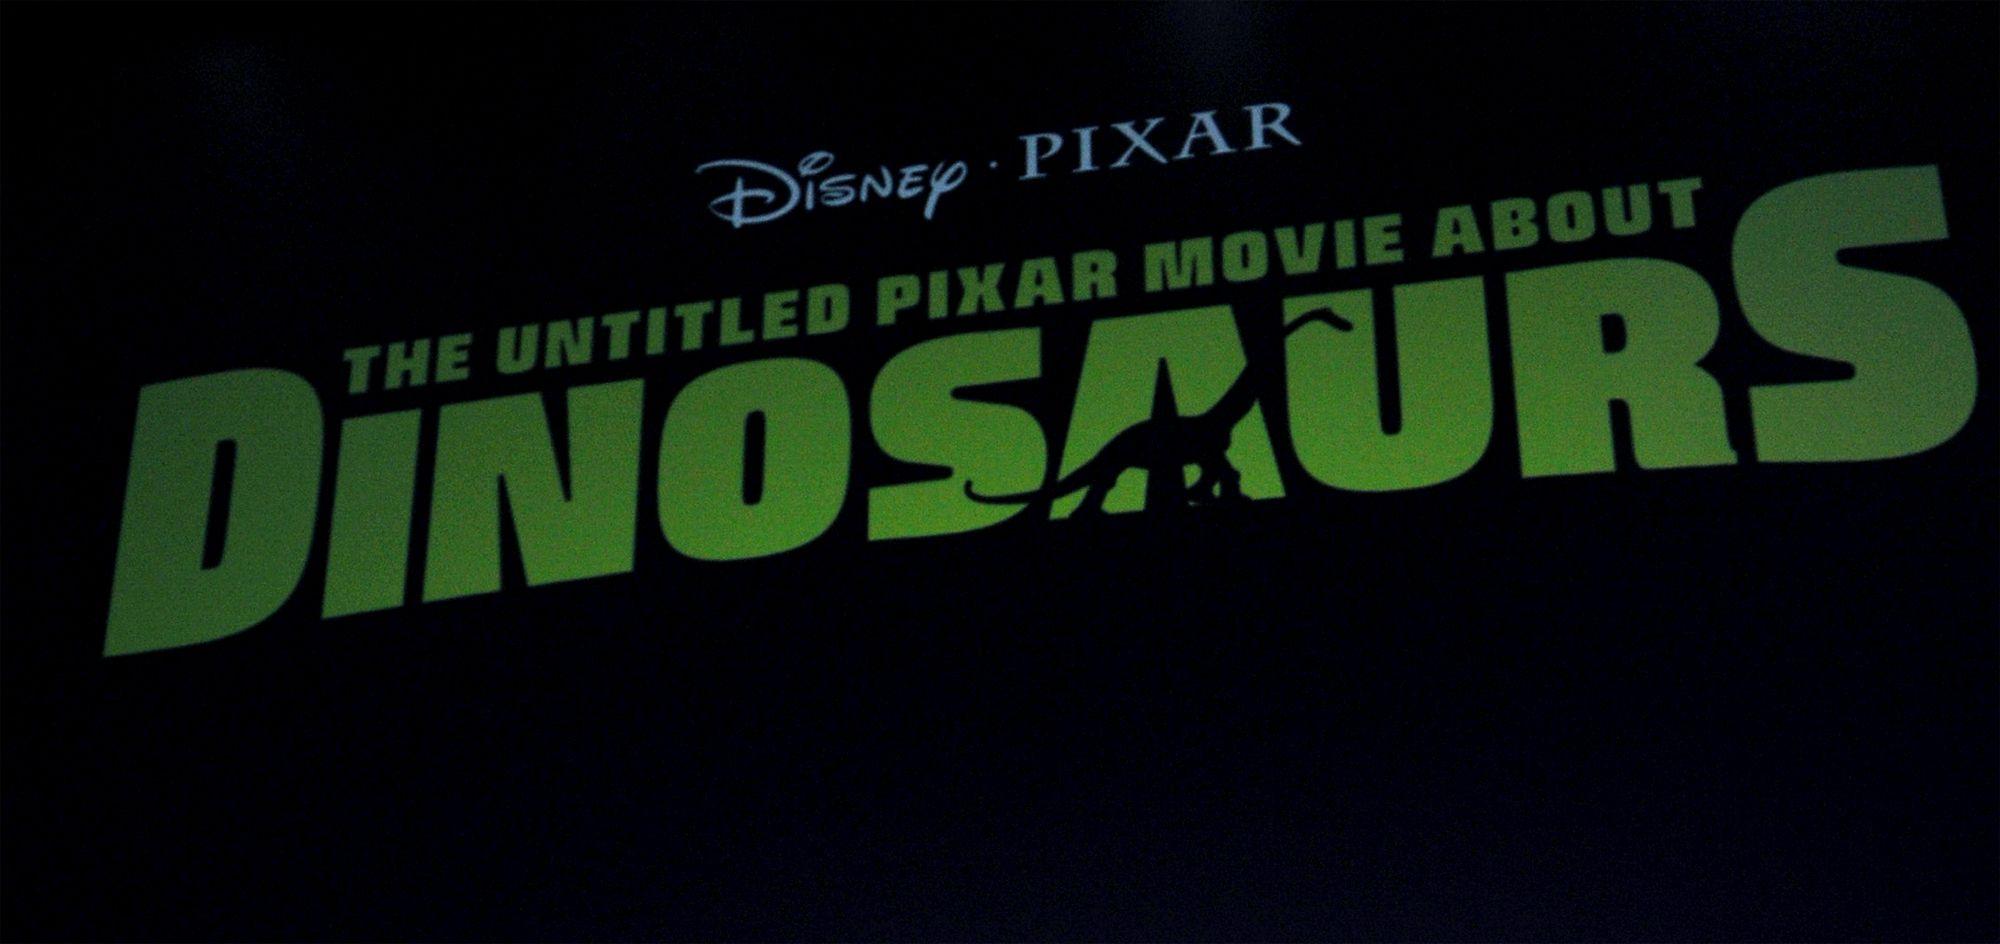 Pixar Movie Logo - LOL: See the Temp Logo For 'The Untitled Pixar Movie About Dinosaurs